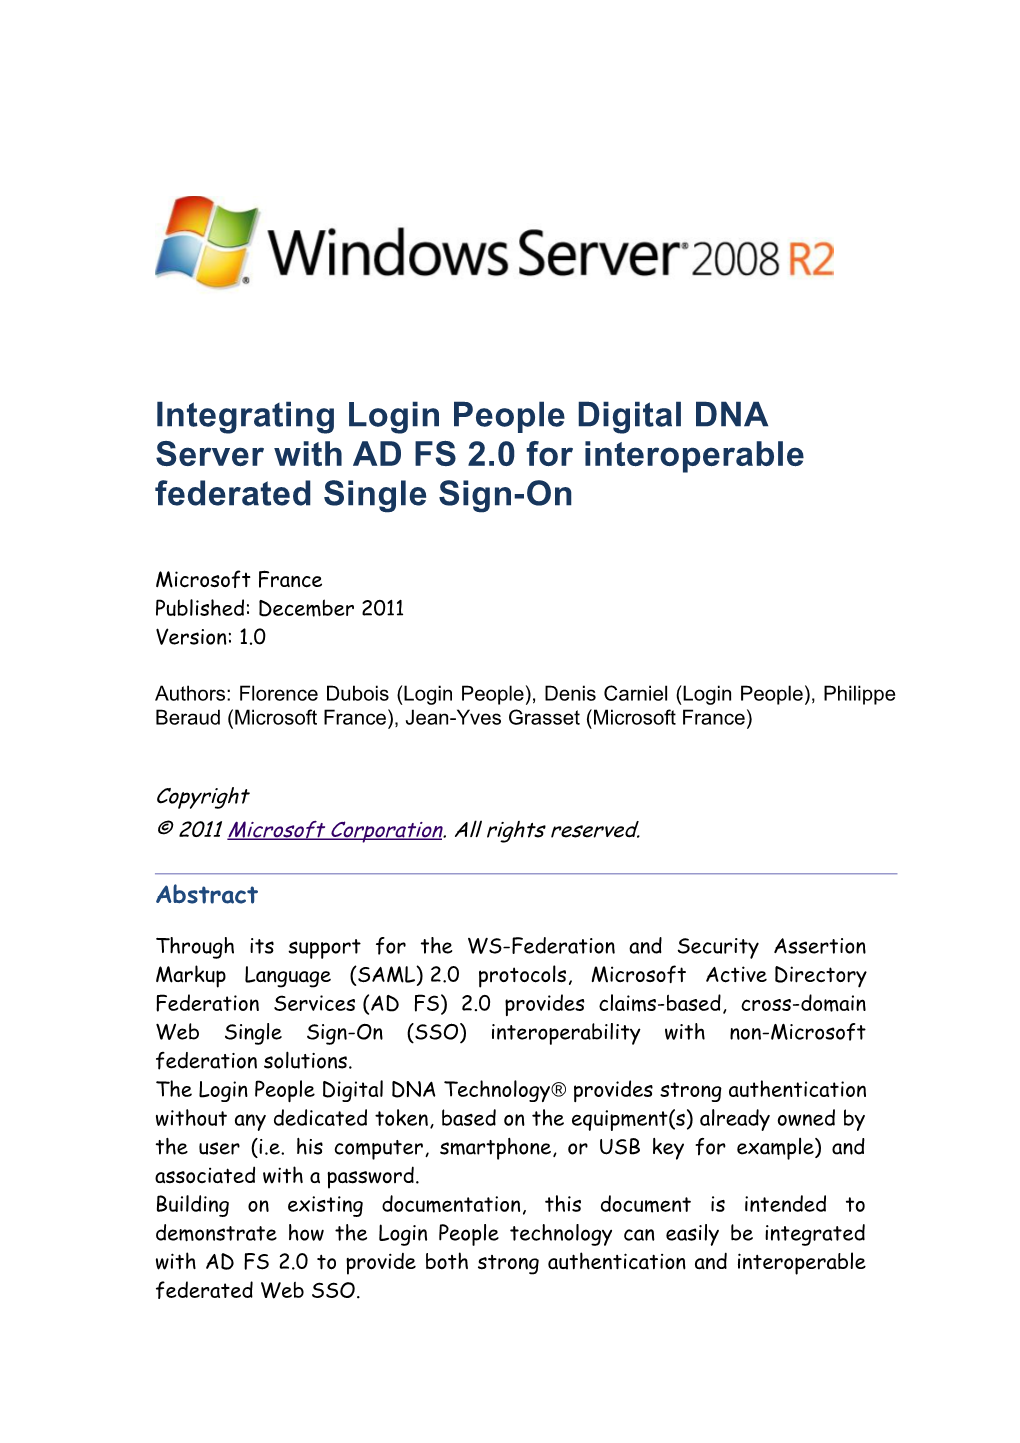 Integrating Login People Digital DNA Server with AD FS 2.0 for Interoperable Federated